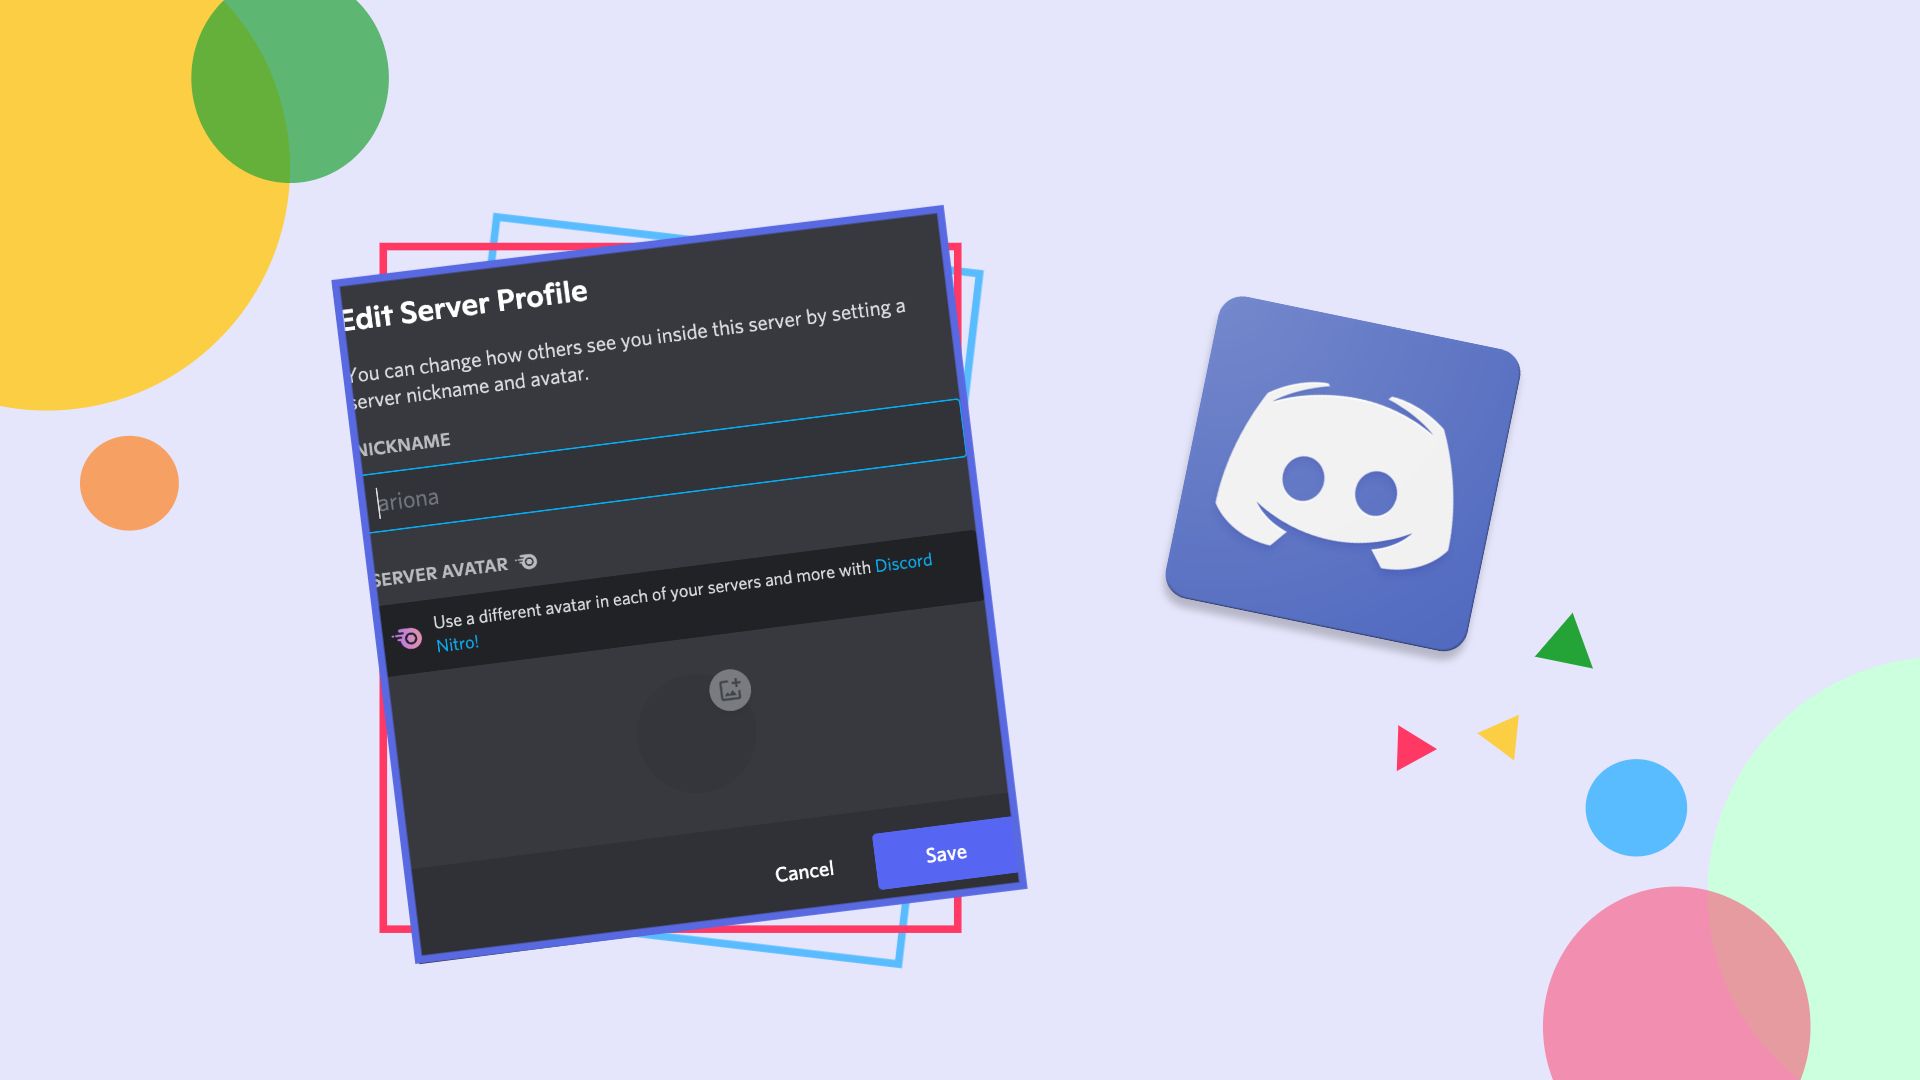 How to Make the Discord Profile Pic a GIF PCMobile